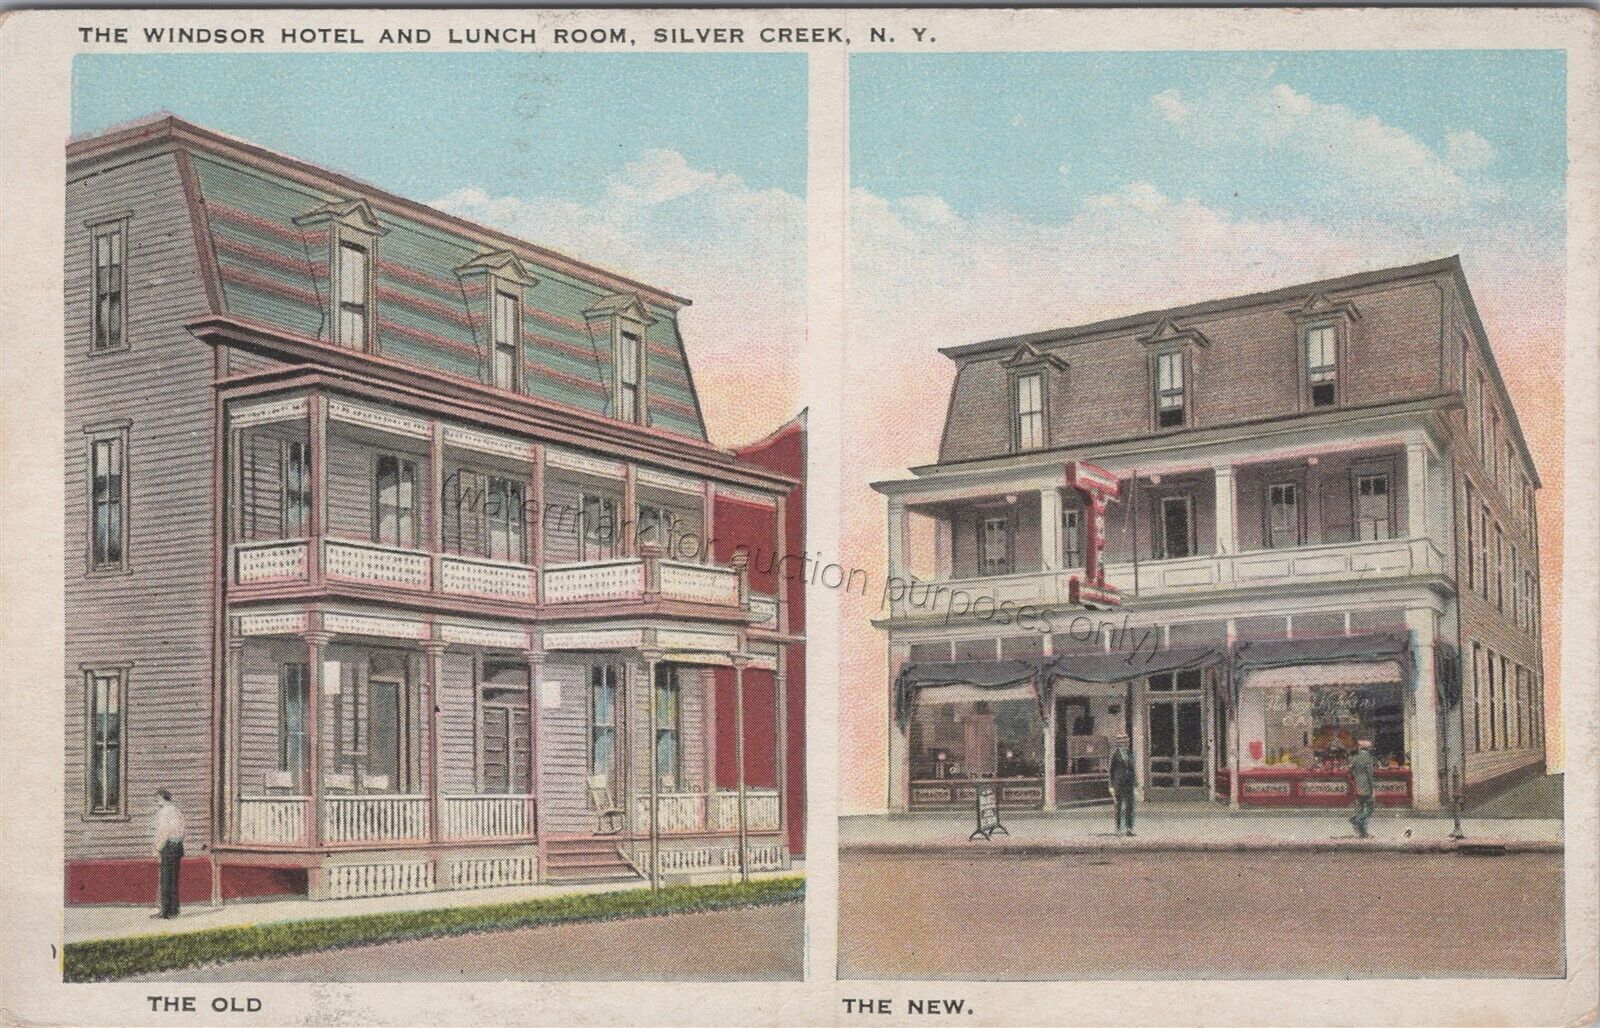 Silver Creek, NY: Windsor Hotel and Lunch Room - Vintage New York Postcard